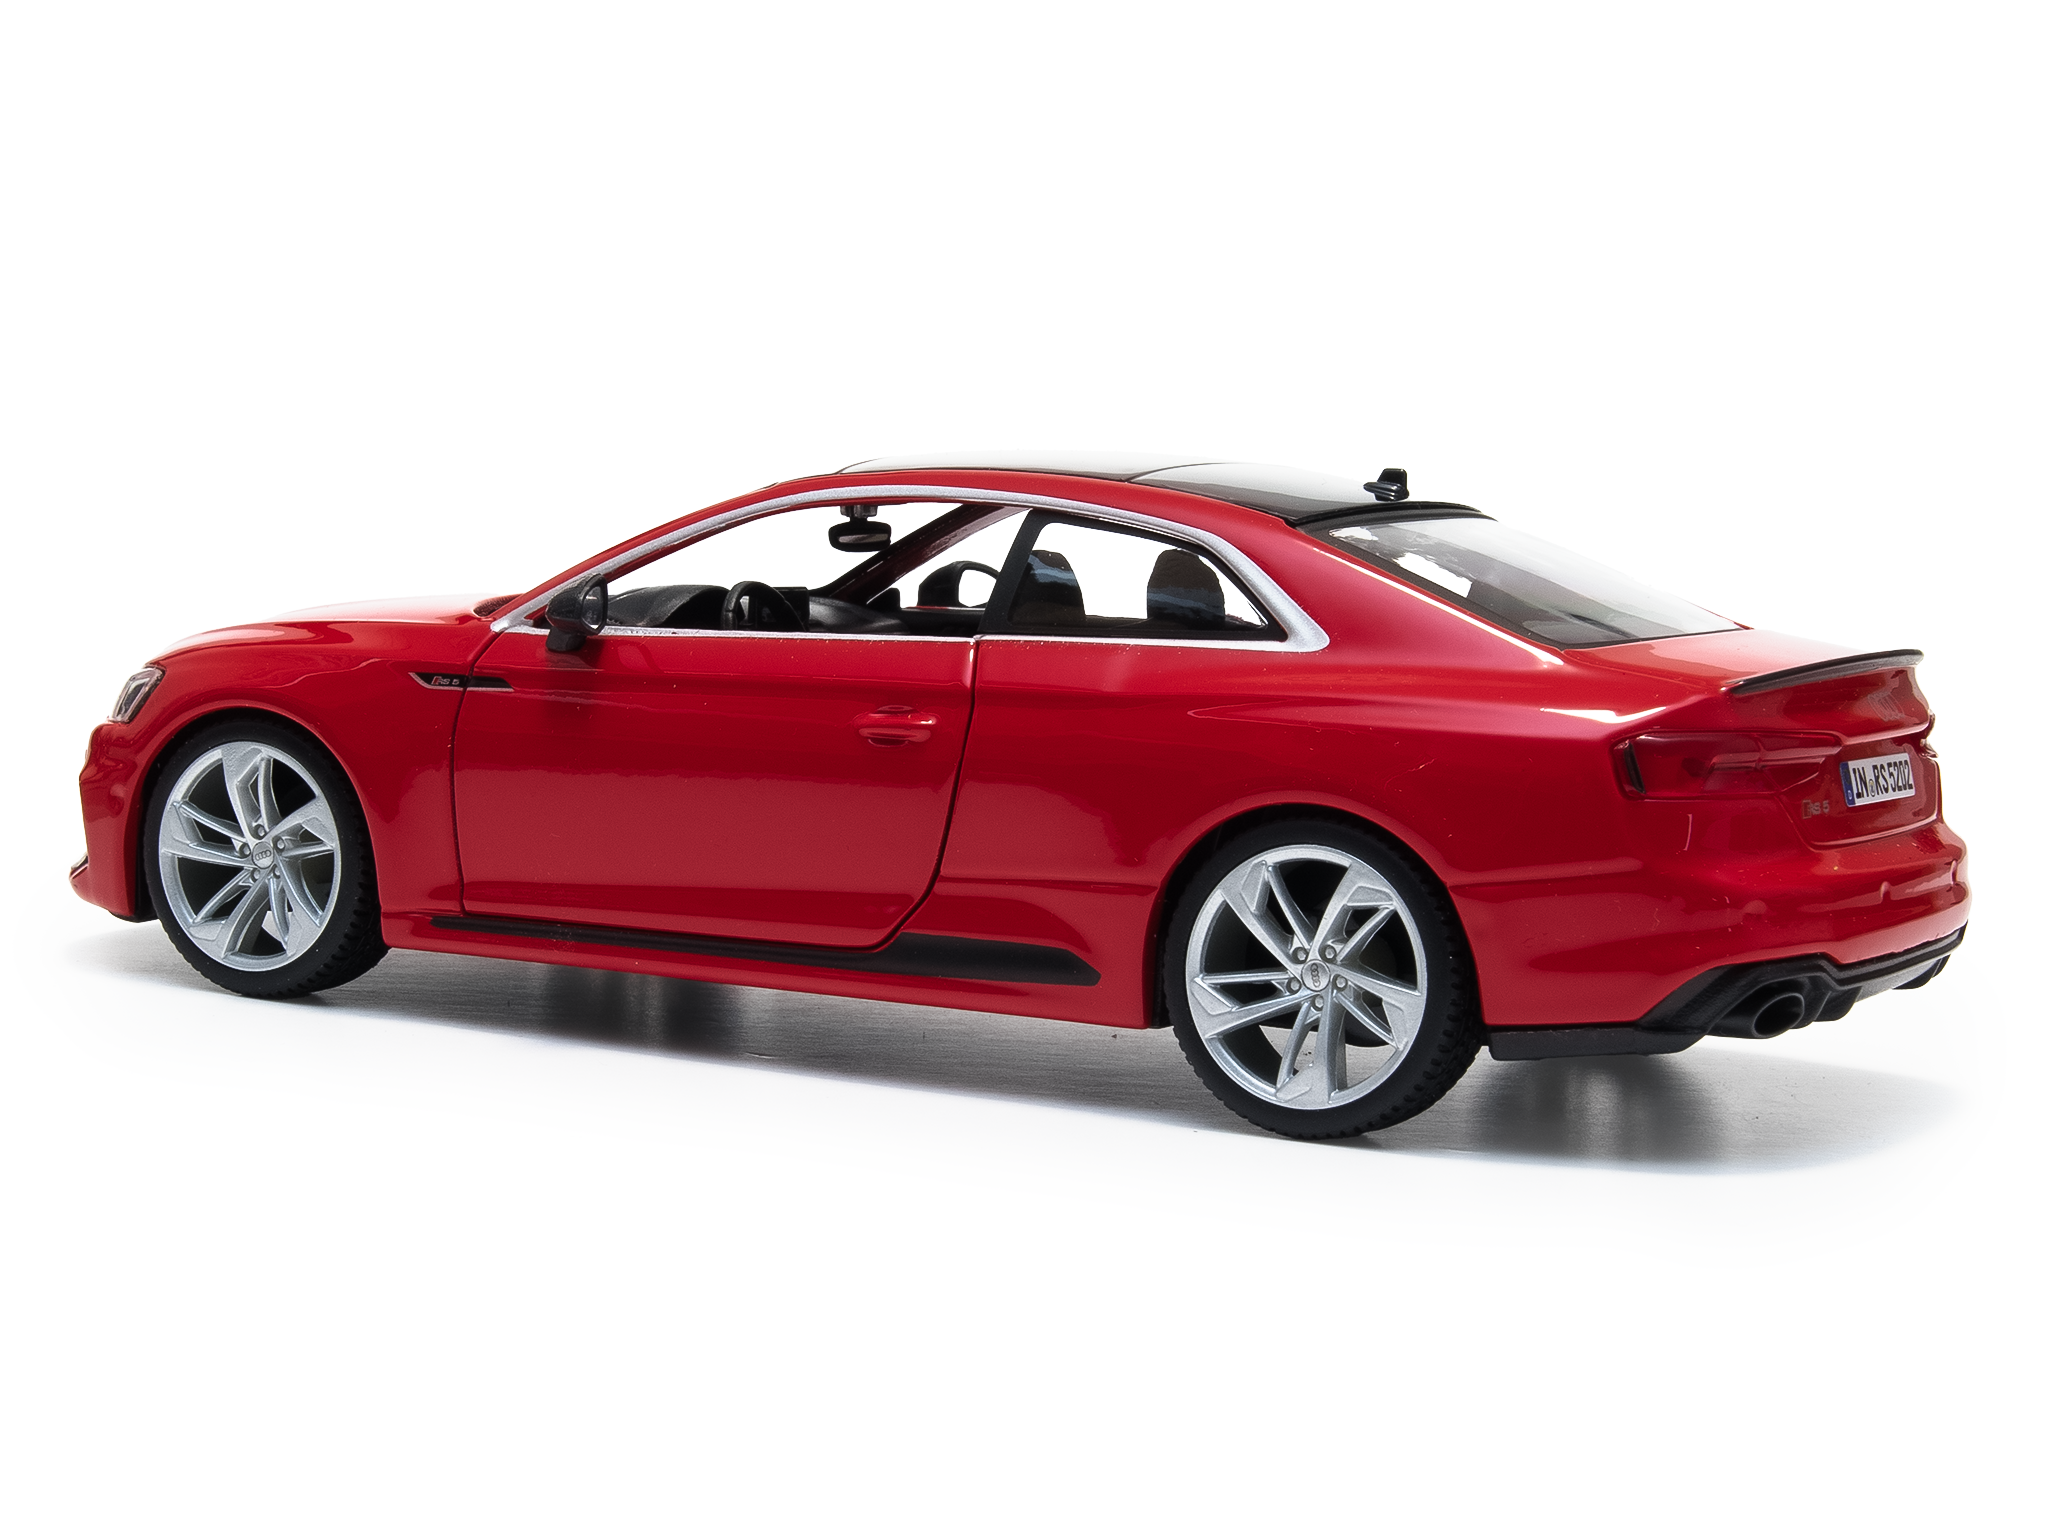 Audi RS 5 Coupe 2019 red - 1:24 Scale Diecast Model Car